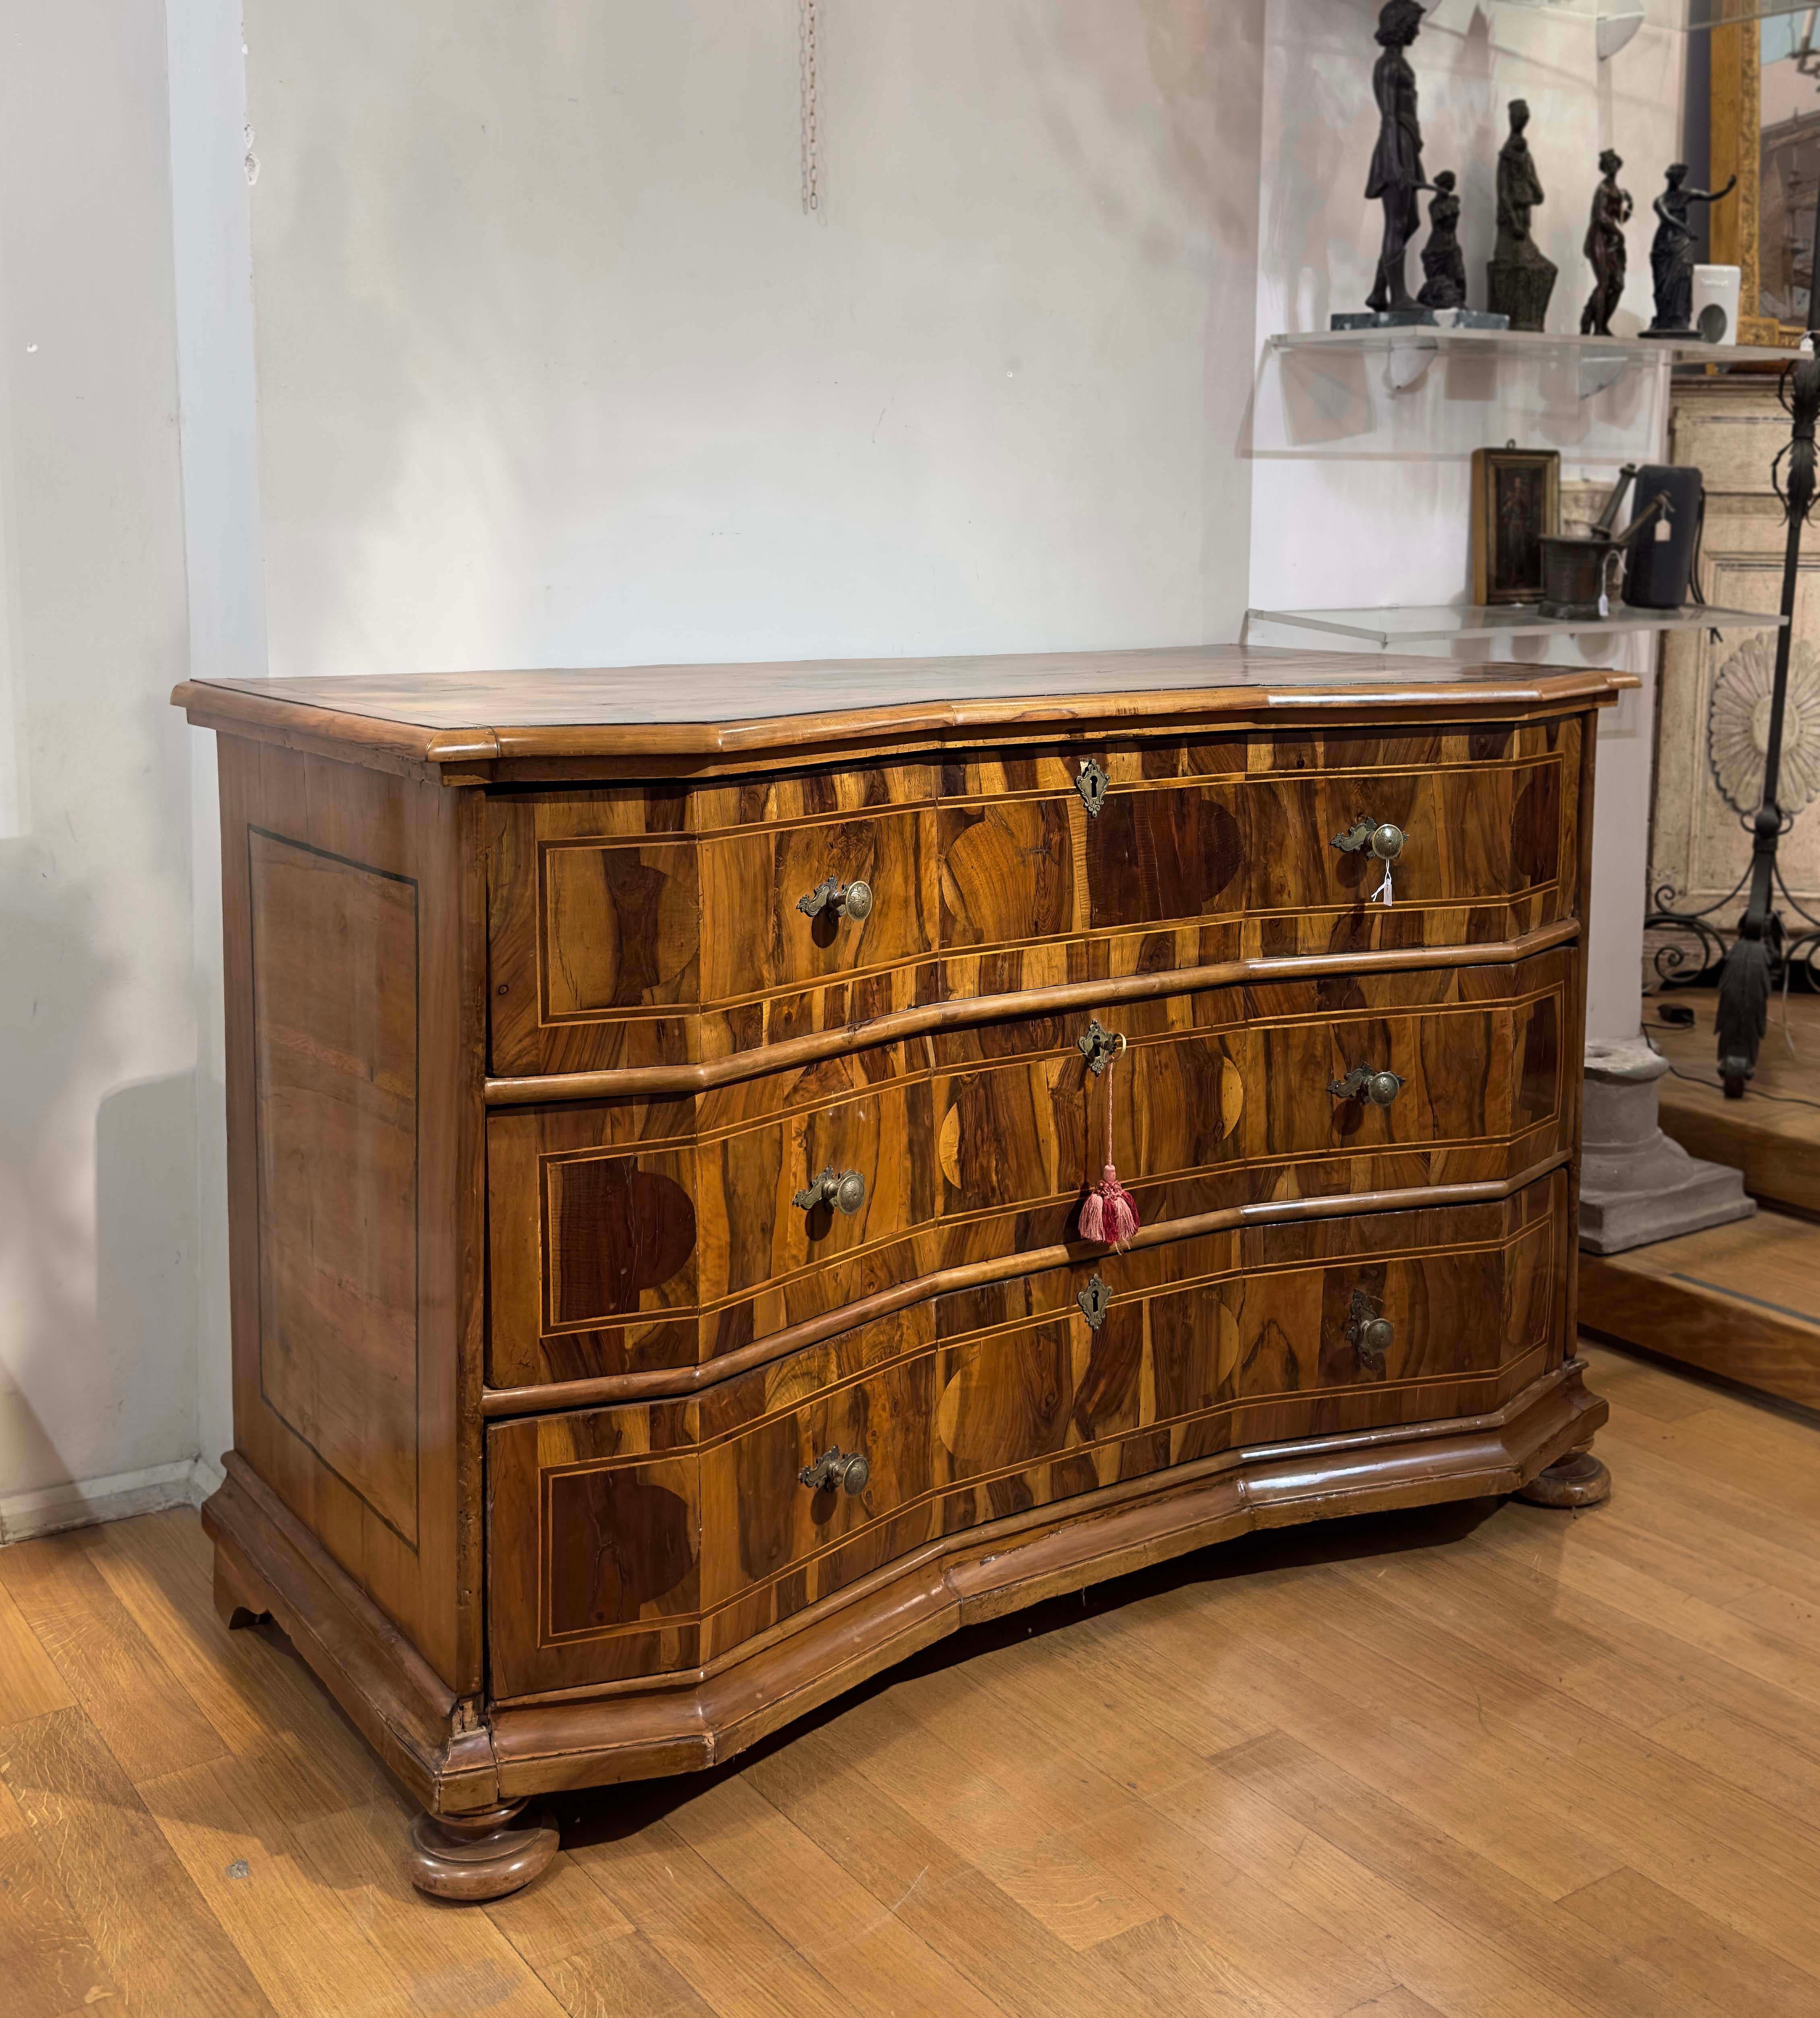 Beautiful veneered chest of drawers in walnut wood and walnut root, enriched with fruit wood fillets. Its uniqueness and sophistication are evident in the wavy front and in the geometric inlay decorations on both the front and the top. The top is